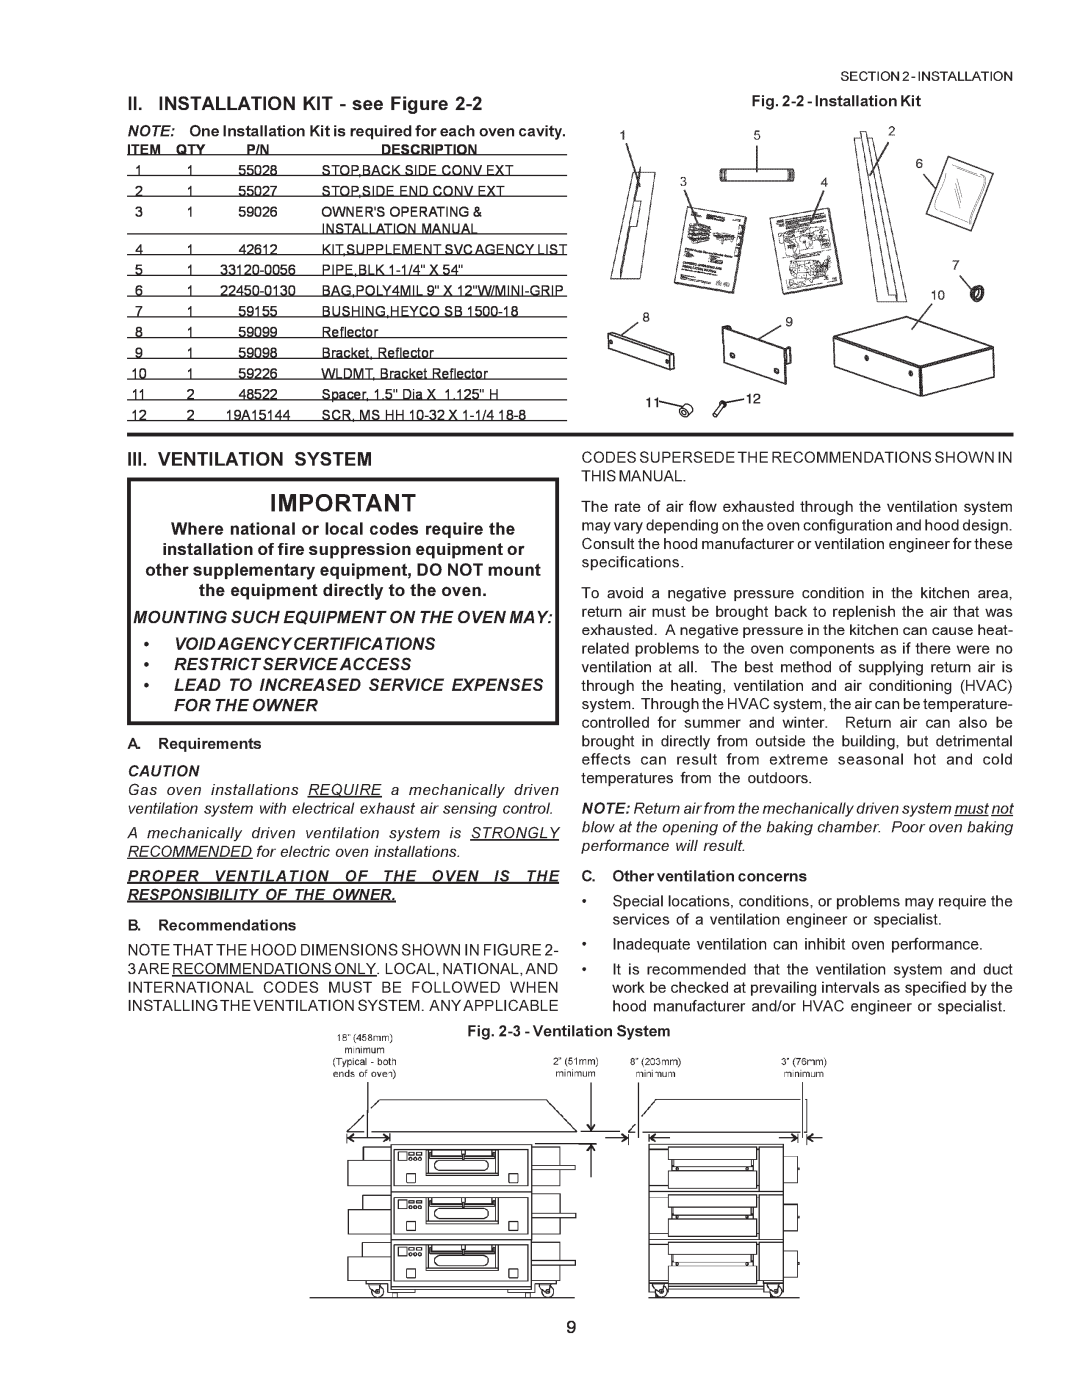 Middleby Cooking Systems Group PS770 installation manual Item Qty, Description 